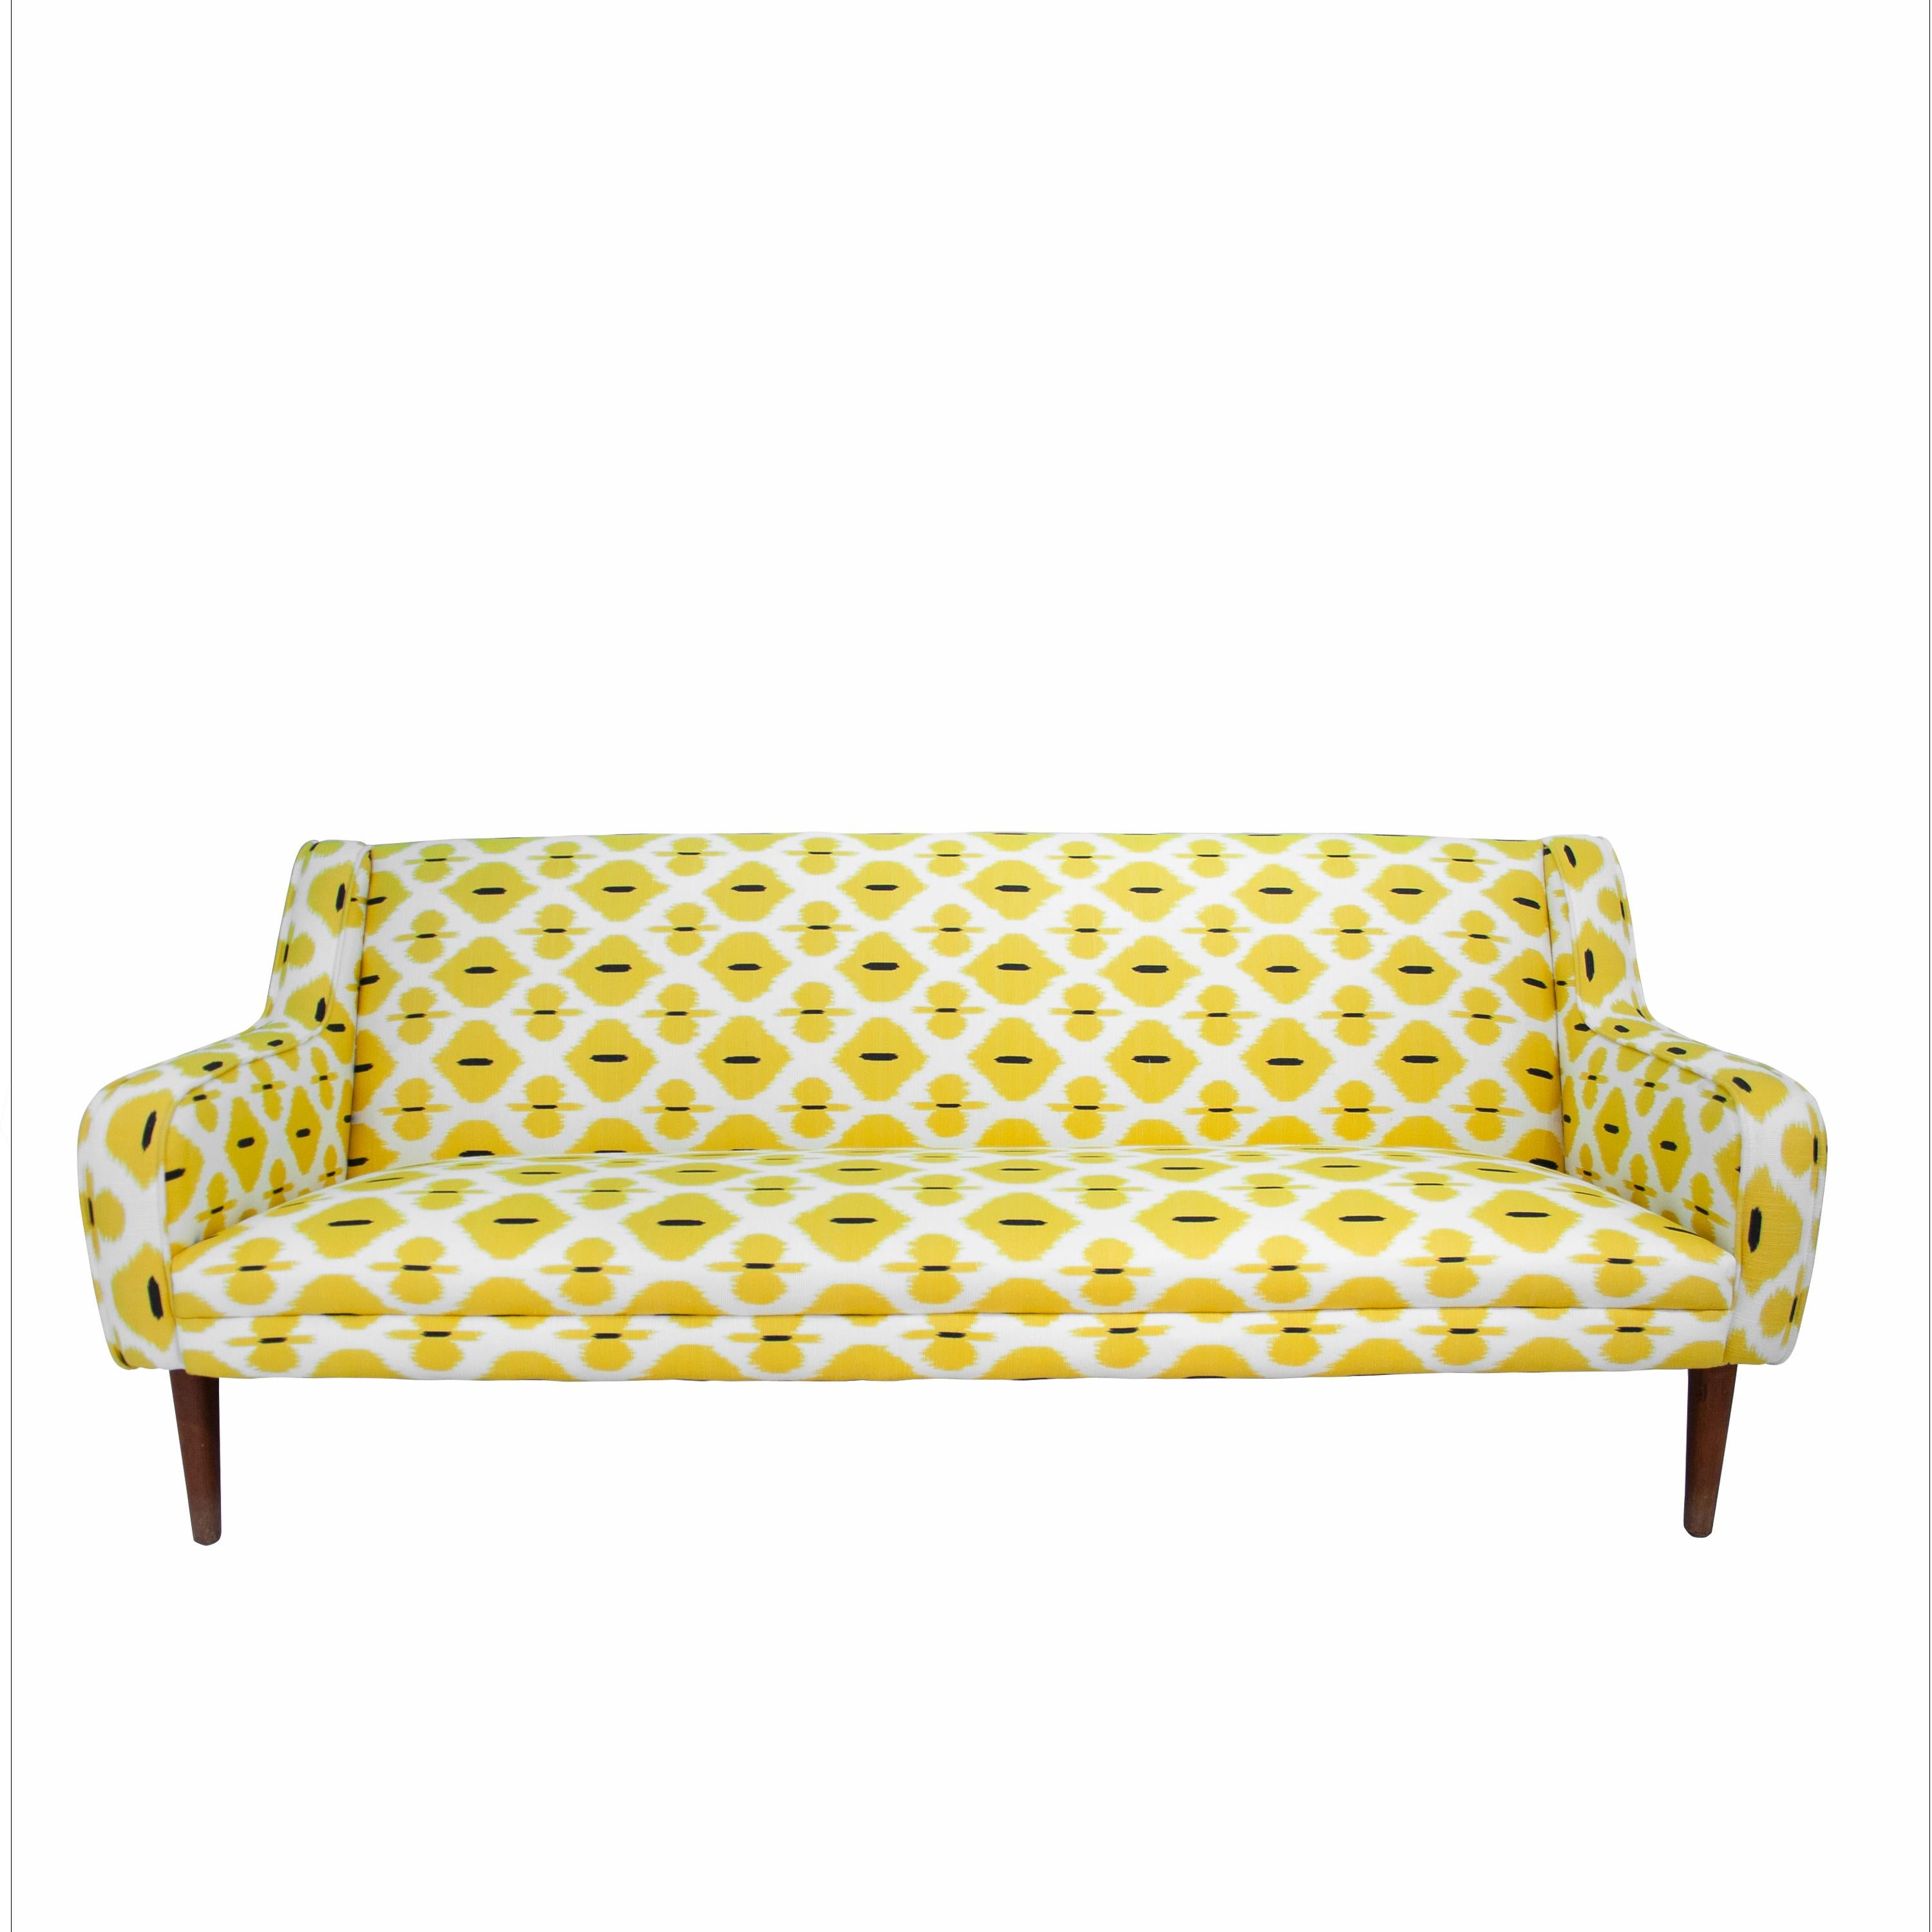 Midcentury Italian Sofa made with Teak-wood structure, with handcrafted reupholstery in linen and cotton fabric with yellow motifs, and conical wooden legs, 1950.